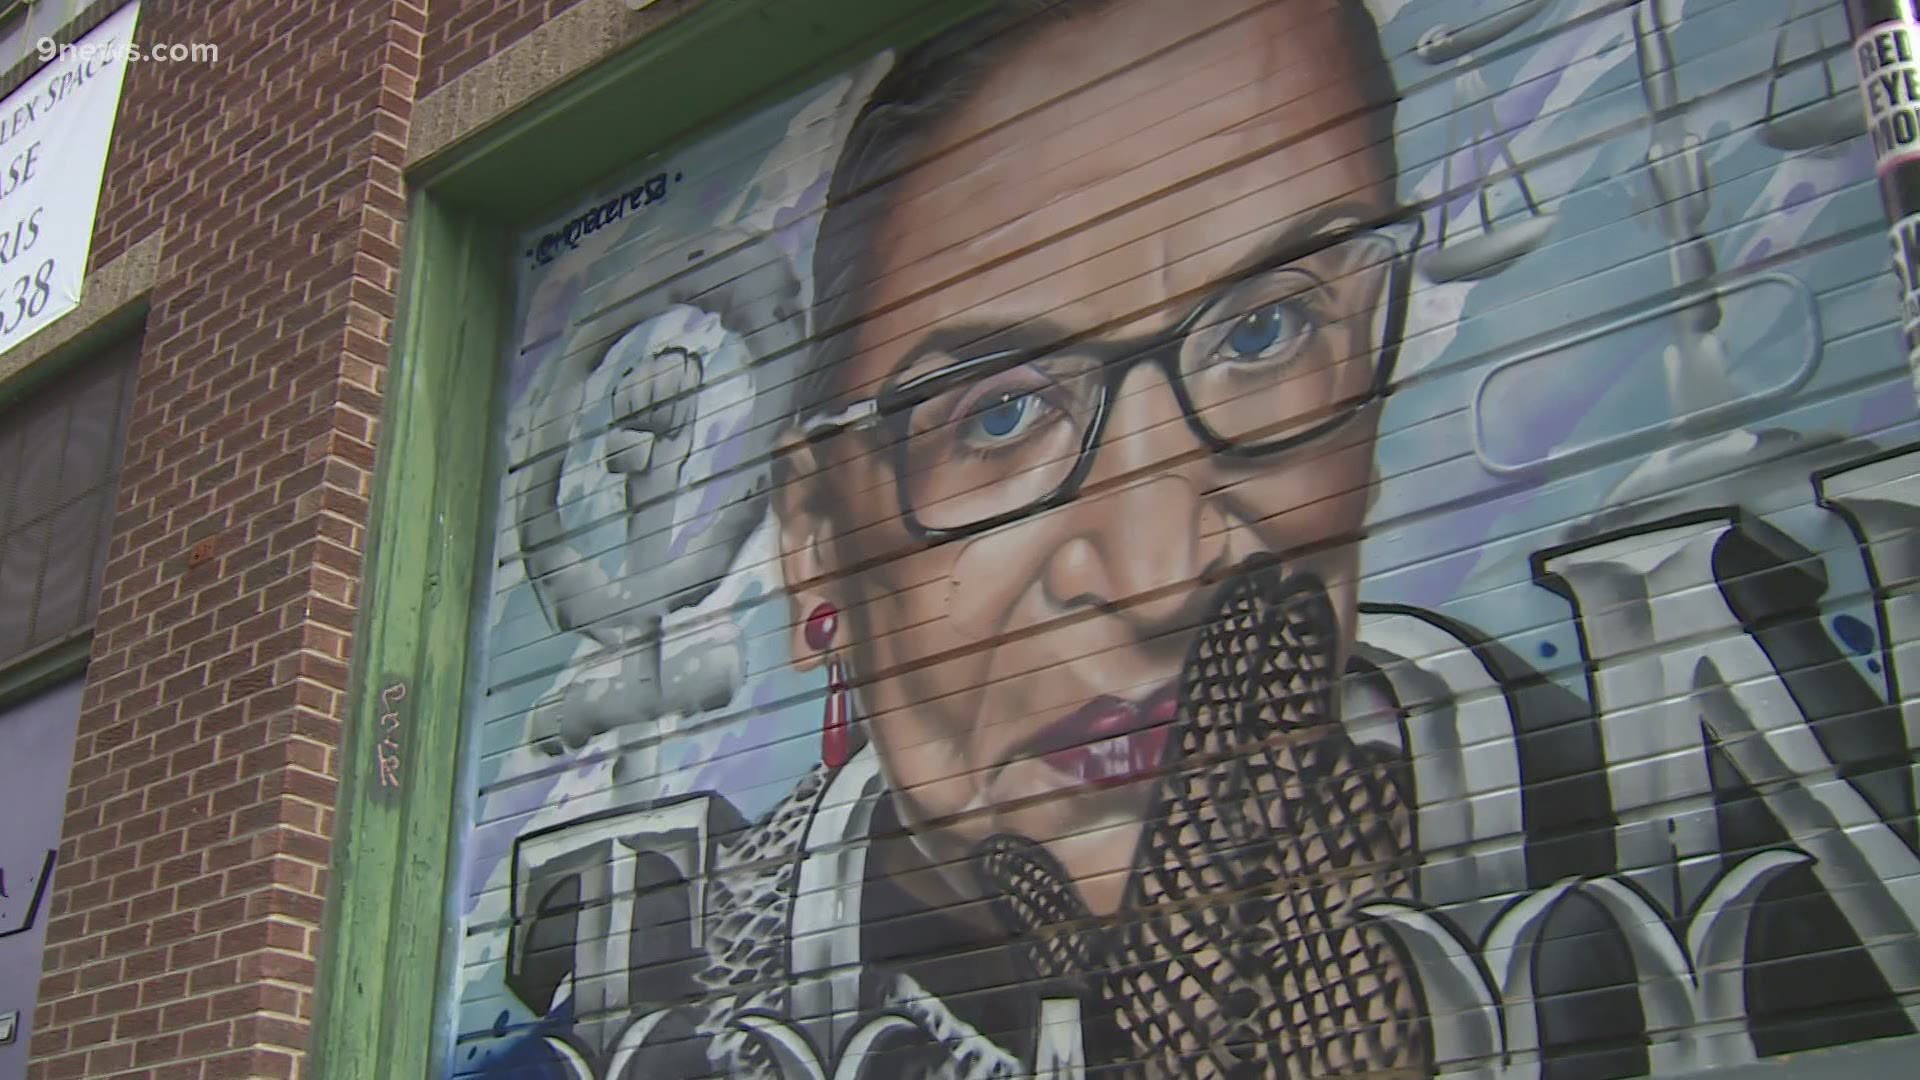 Two New York street artists, Menace and Resa,  were in town for Crush Walls when they heard about RBG and turned to their craft to honor her.